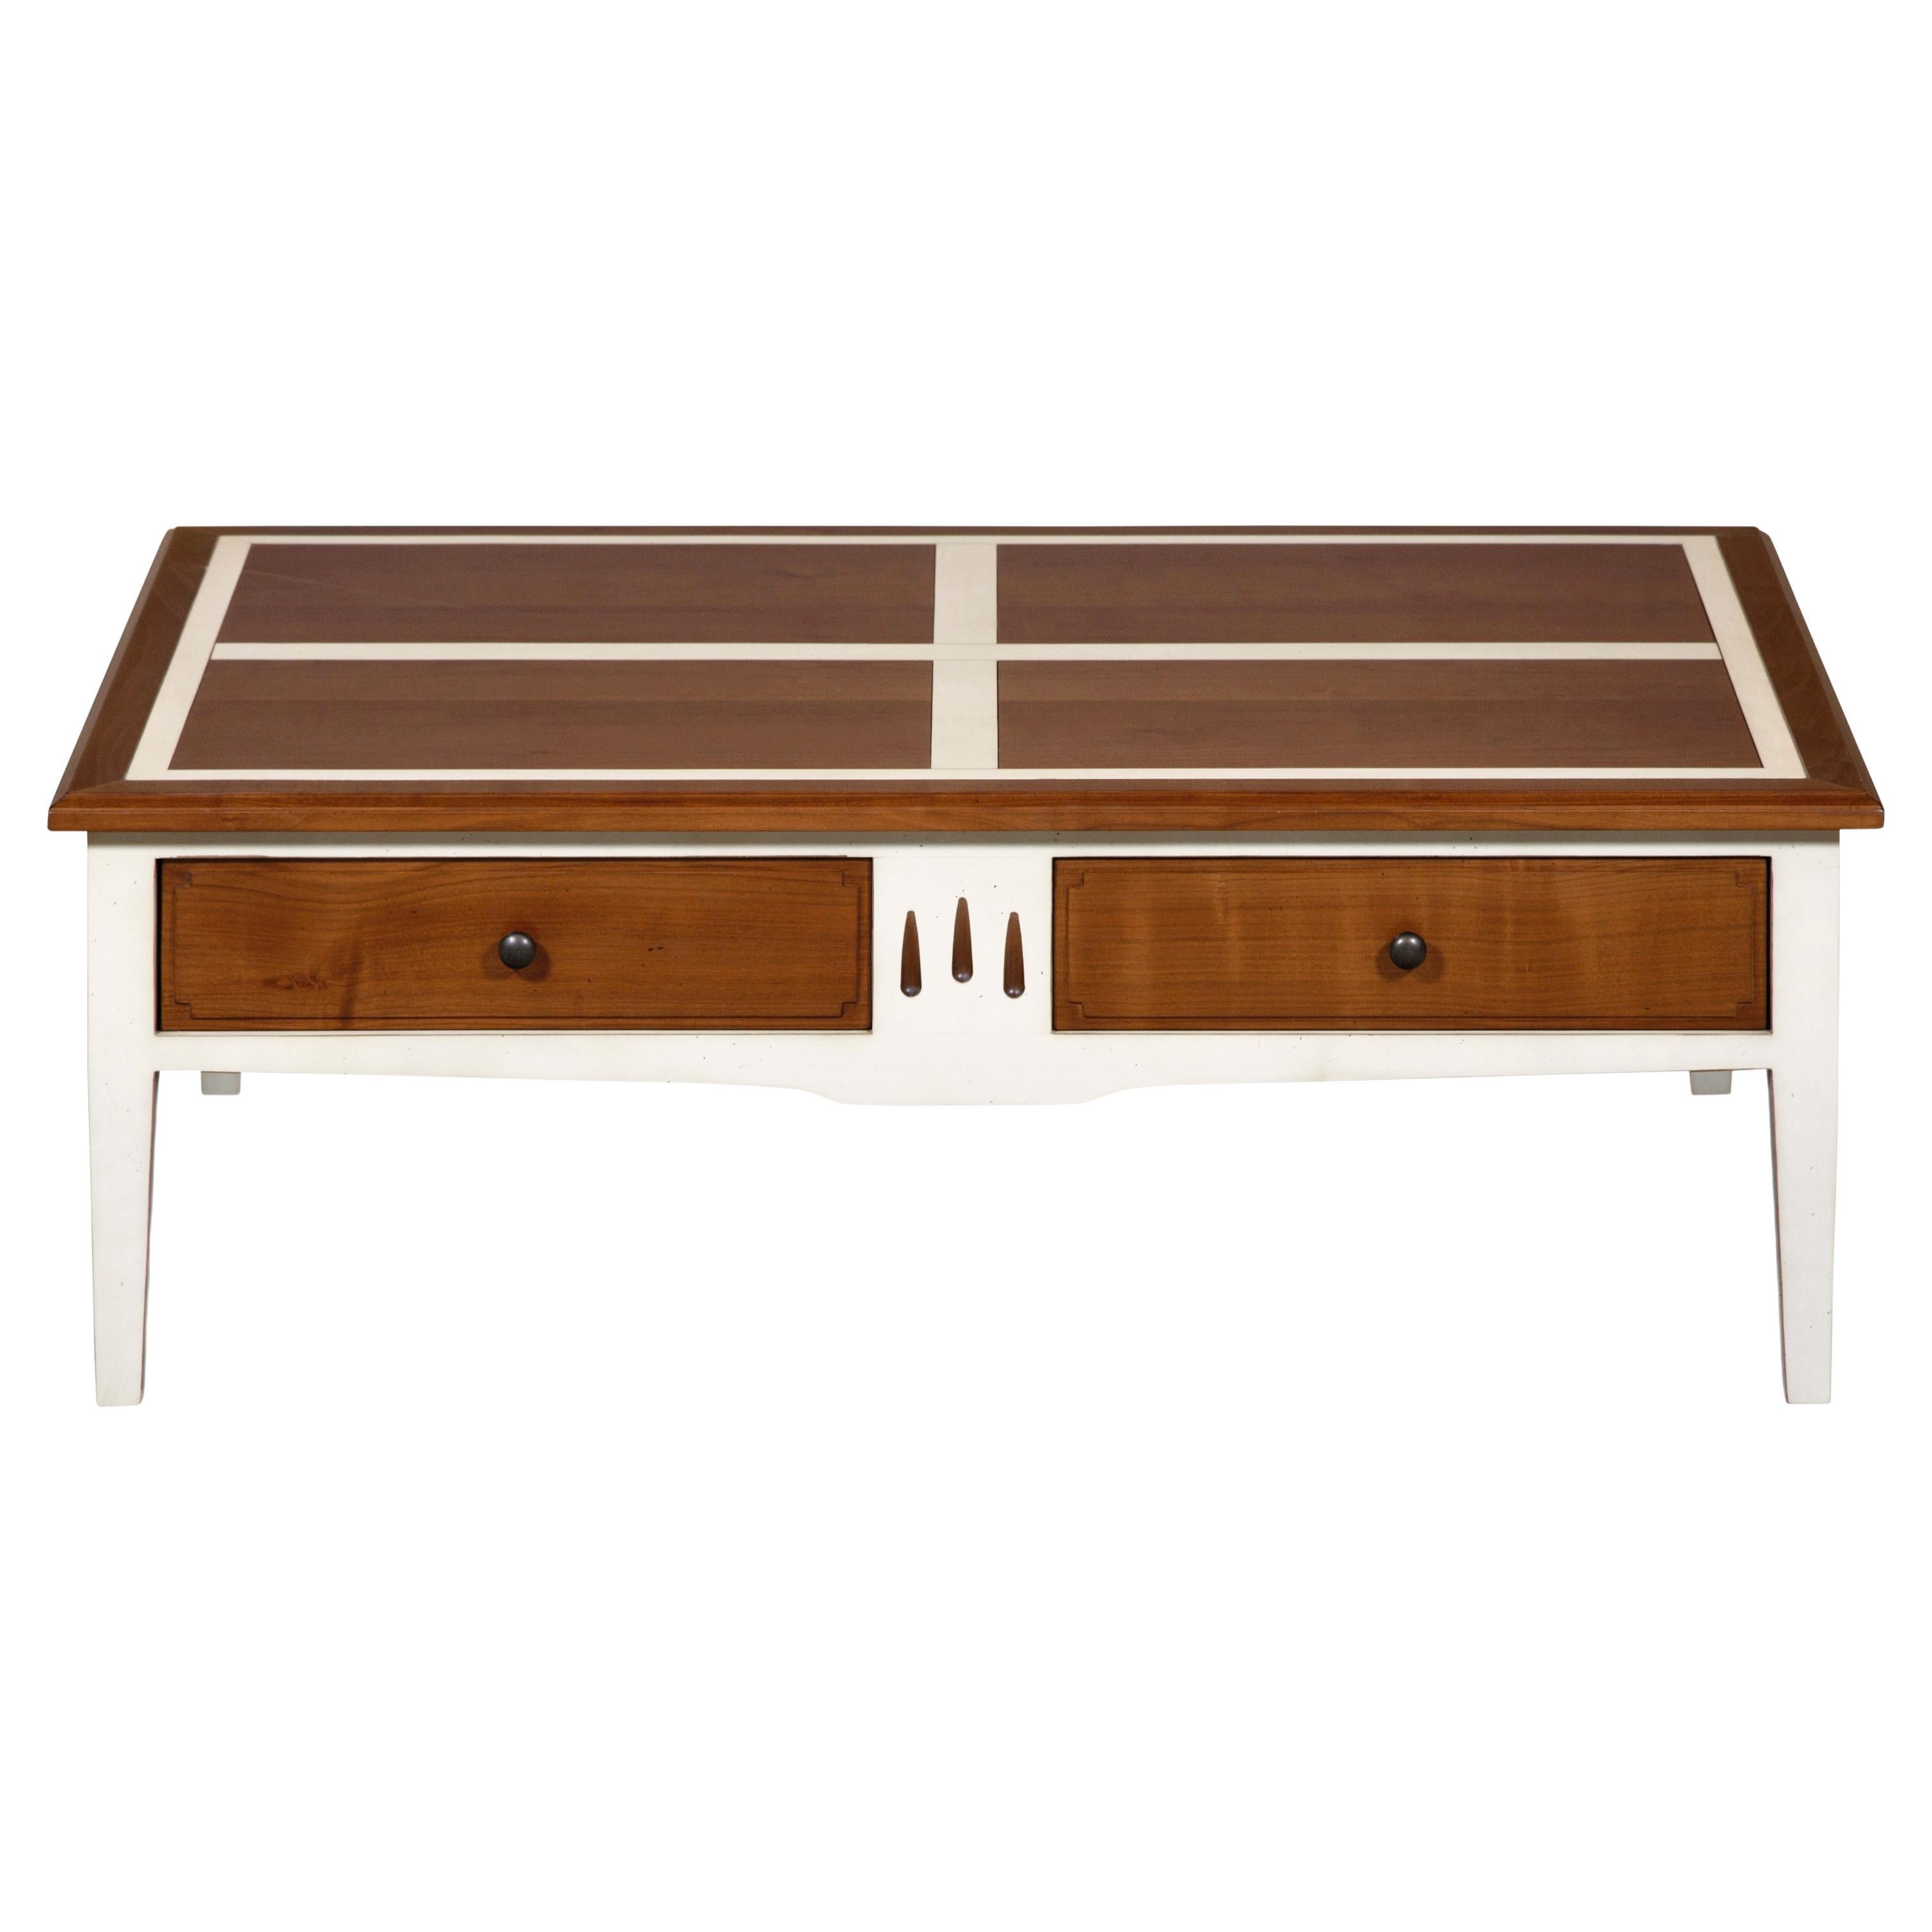 2-Drawer Coffee Table in Cherry, a French Directoire Style Re-Interpretation  For Sale